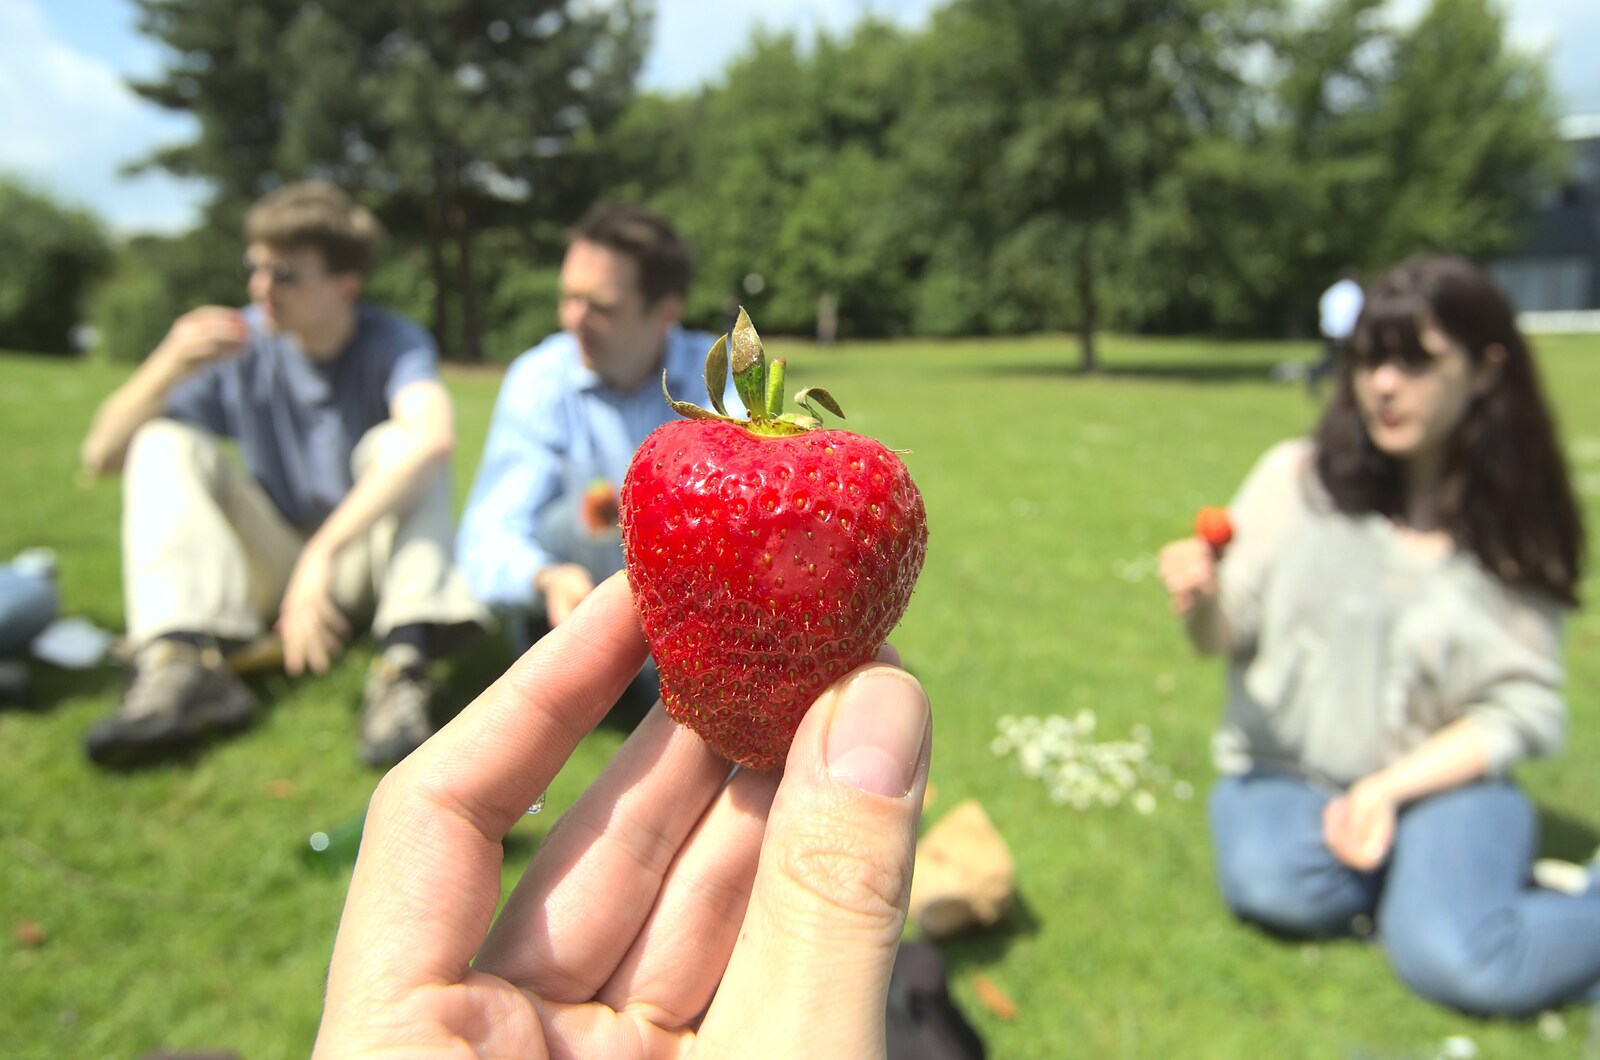 Nosher's got a giant strawberry from Taptu's Million Searches, and a Picnic, Science Park, Cambridge - 29th May 2009